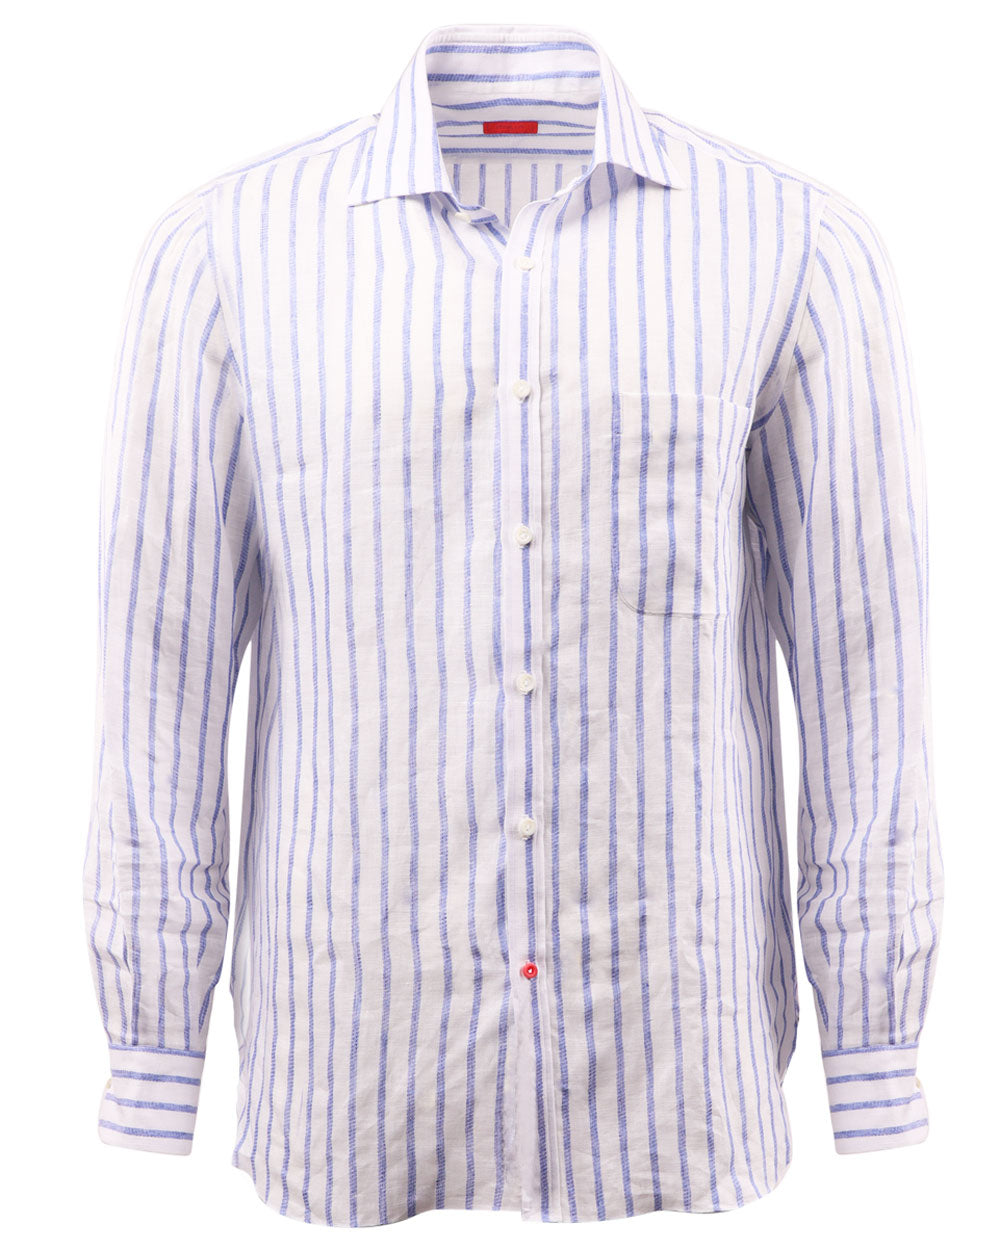 White and Blue Striped Sportshirt